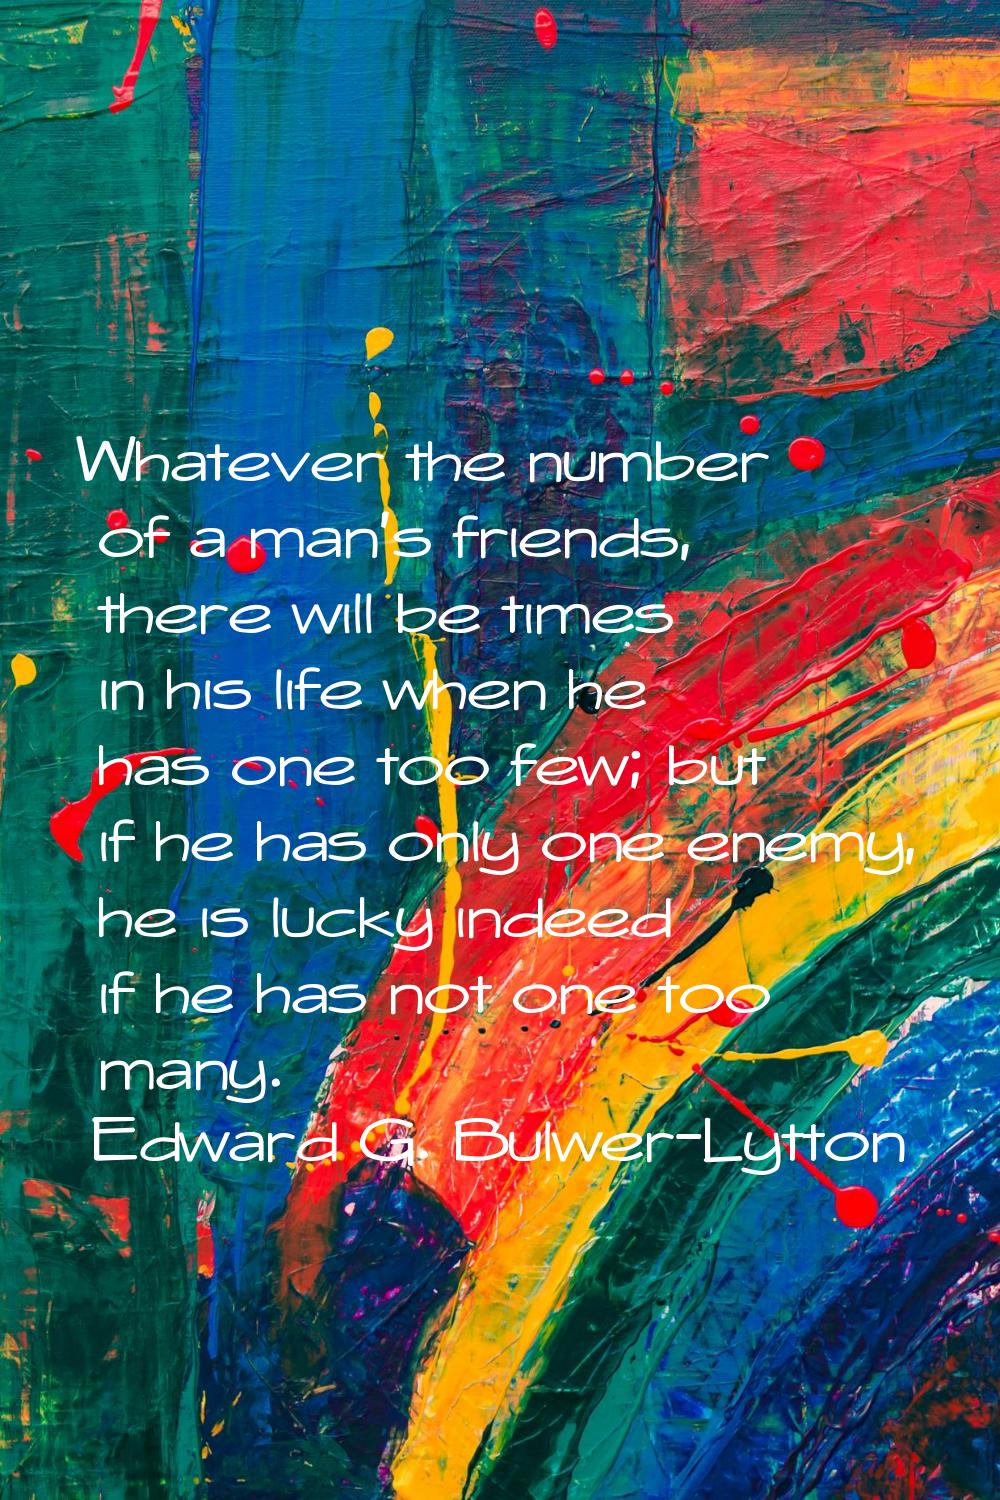 Whatever the number of a man's friends, there will be times in his life when he has one too few; bu